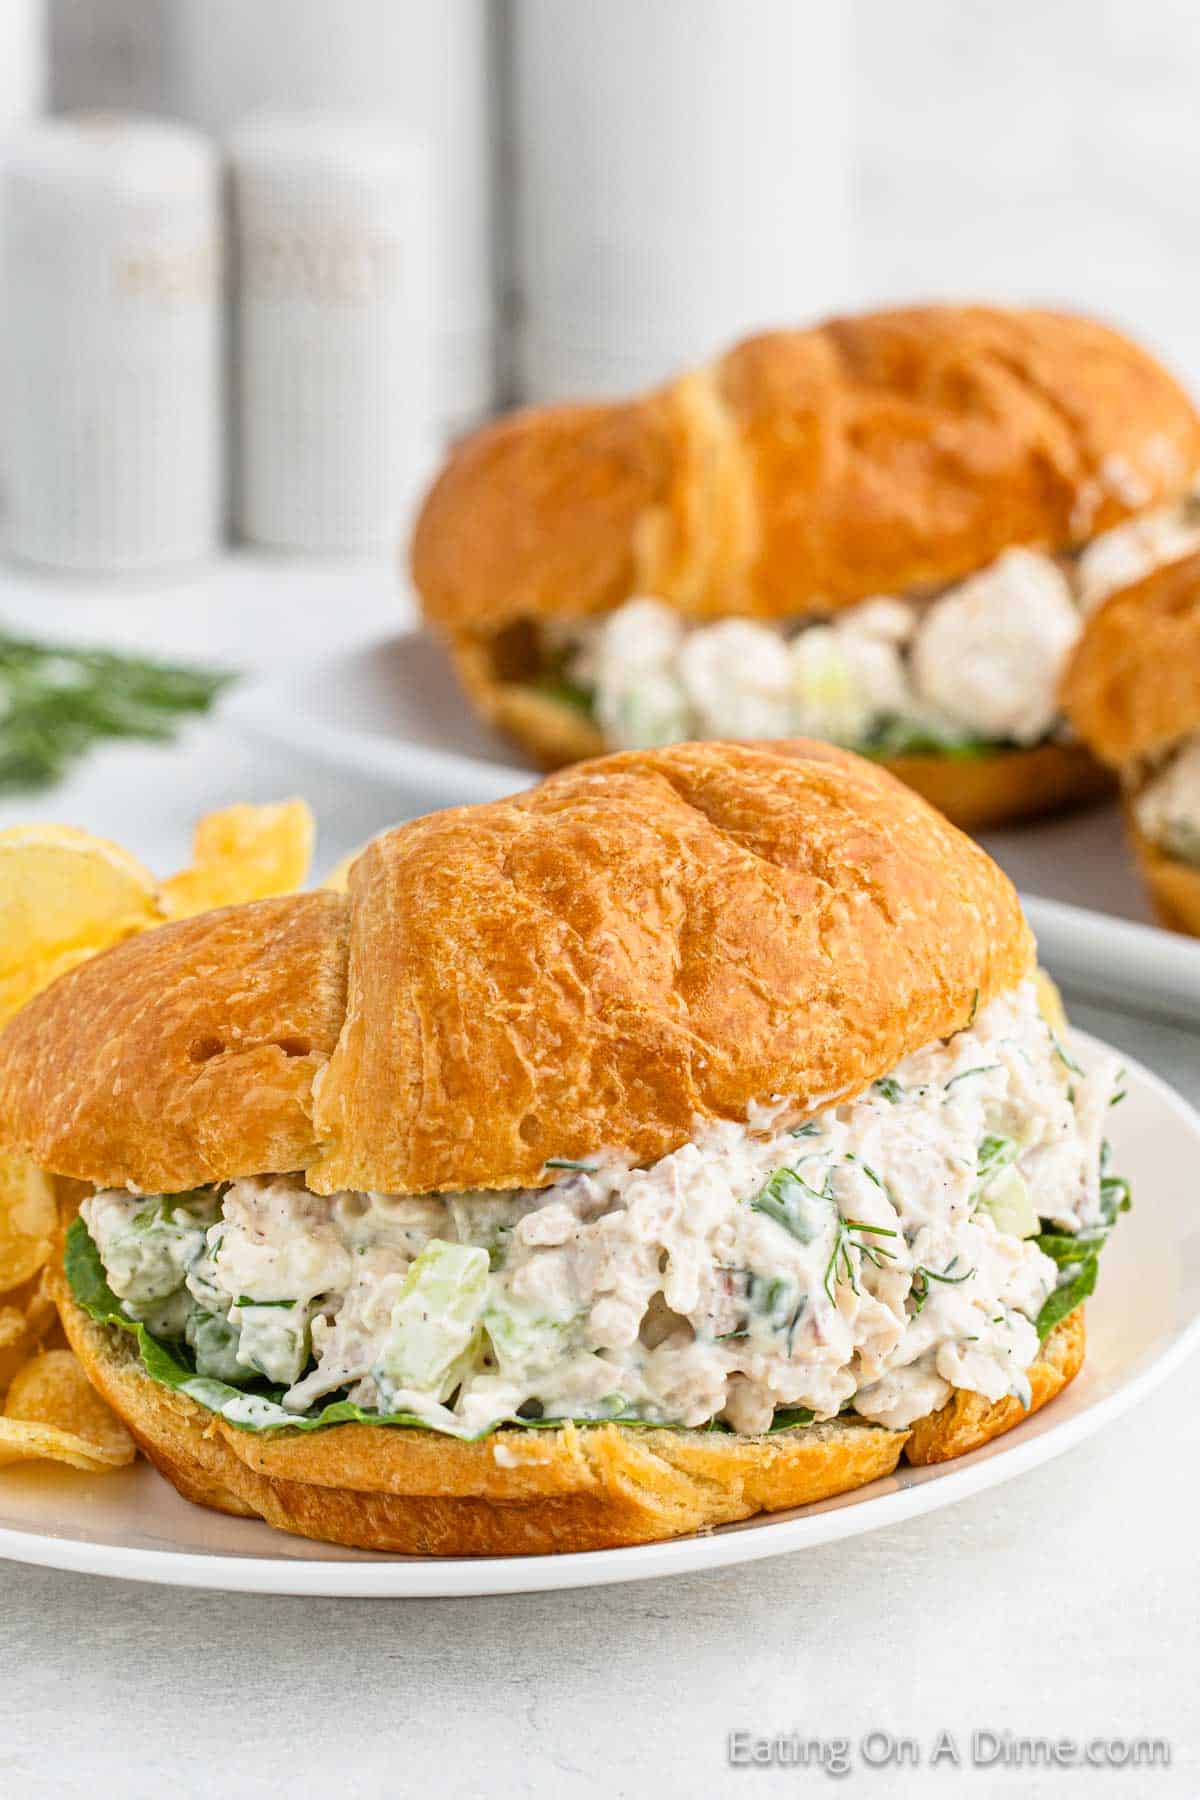 A close-up of a croissant sandwich filled with a creamy chicken salad mixture, garnished with green leafy lettuce. Another similar sandwich is blurred in the background, and there are potato chips on the side. The text "Eating on a Dime.com" is visible at the bottom, showcasing the best chicken salad recipe.